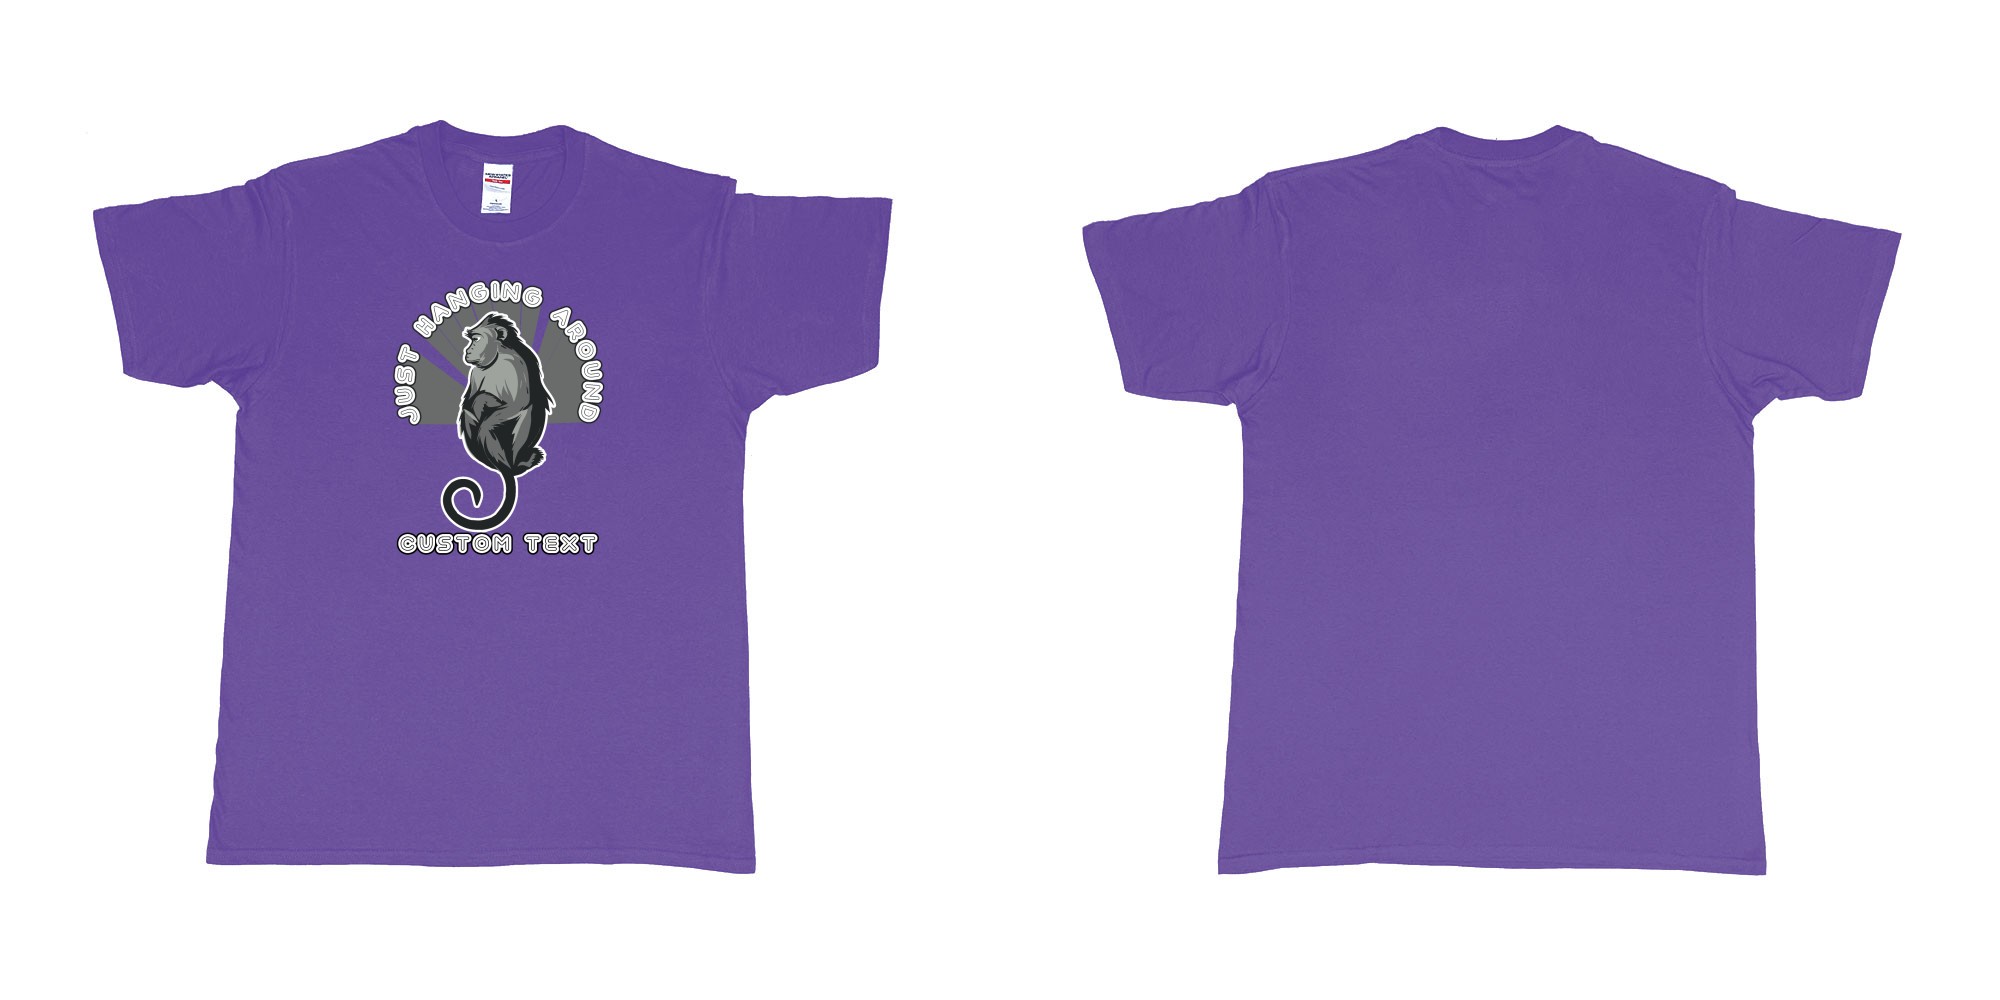 Custom tshirt design just hanging around monkey in fabric color purple choice your own text made in Bali by The Pirate Way